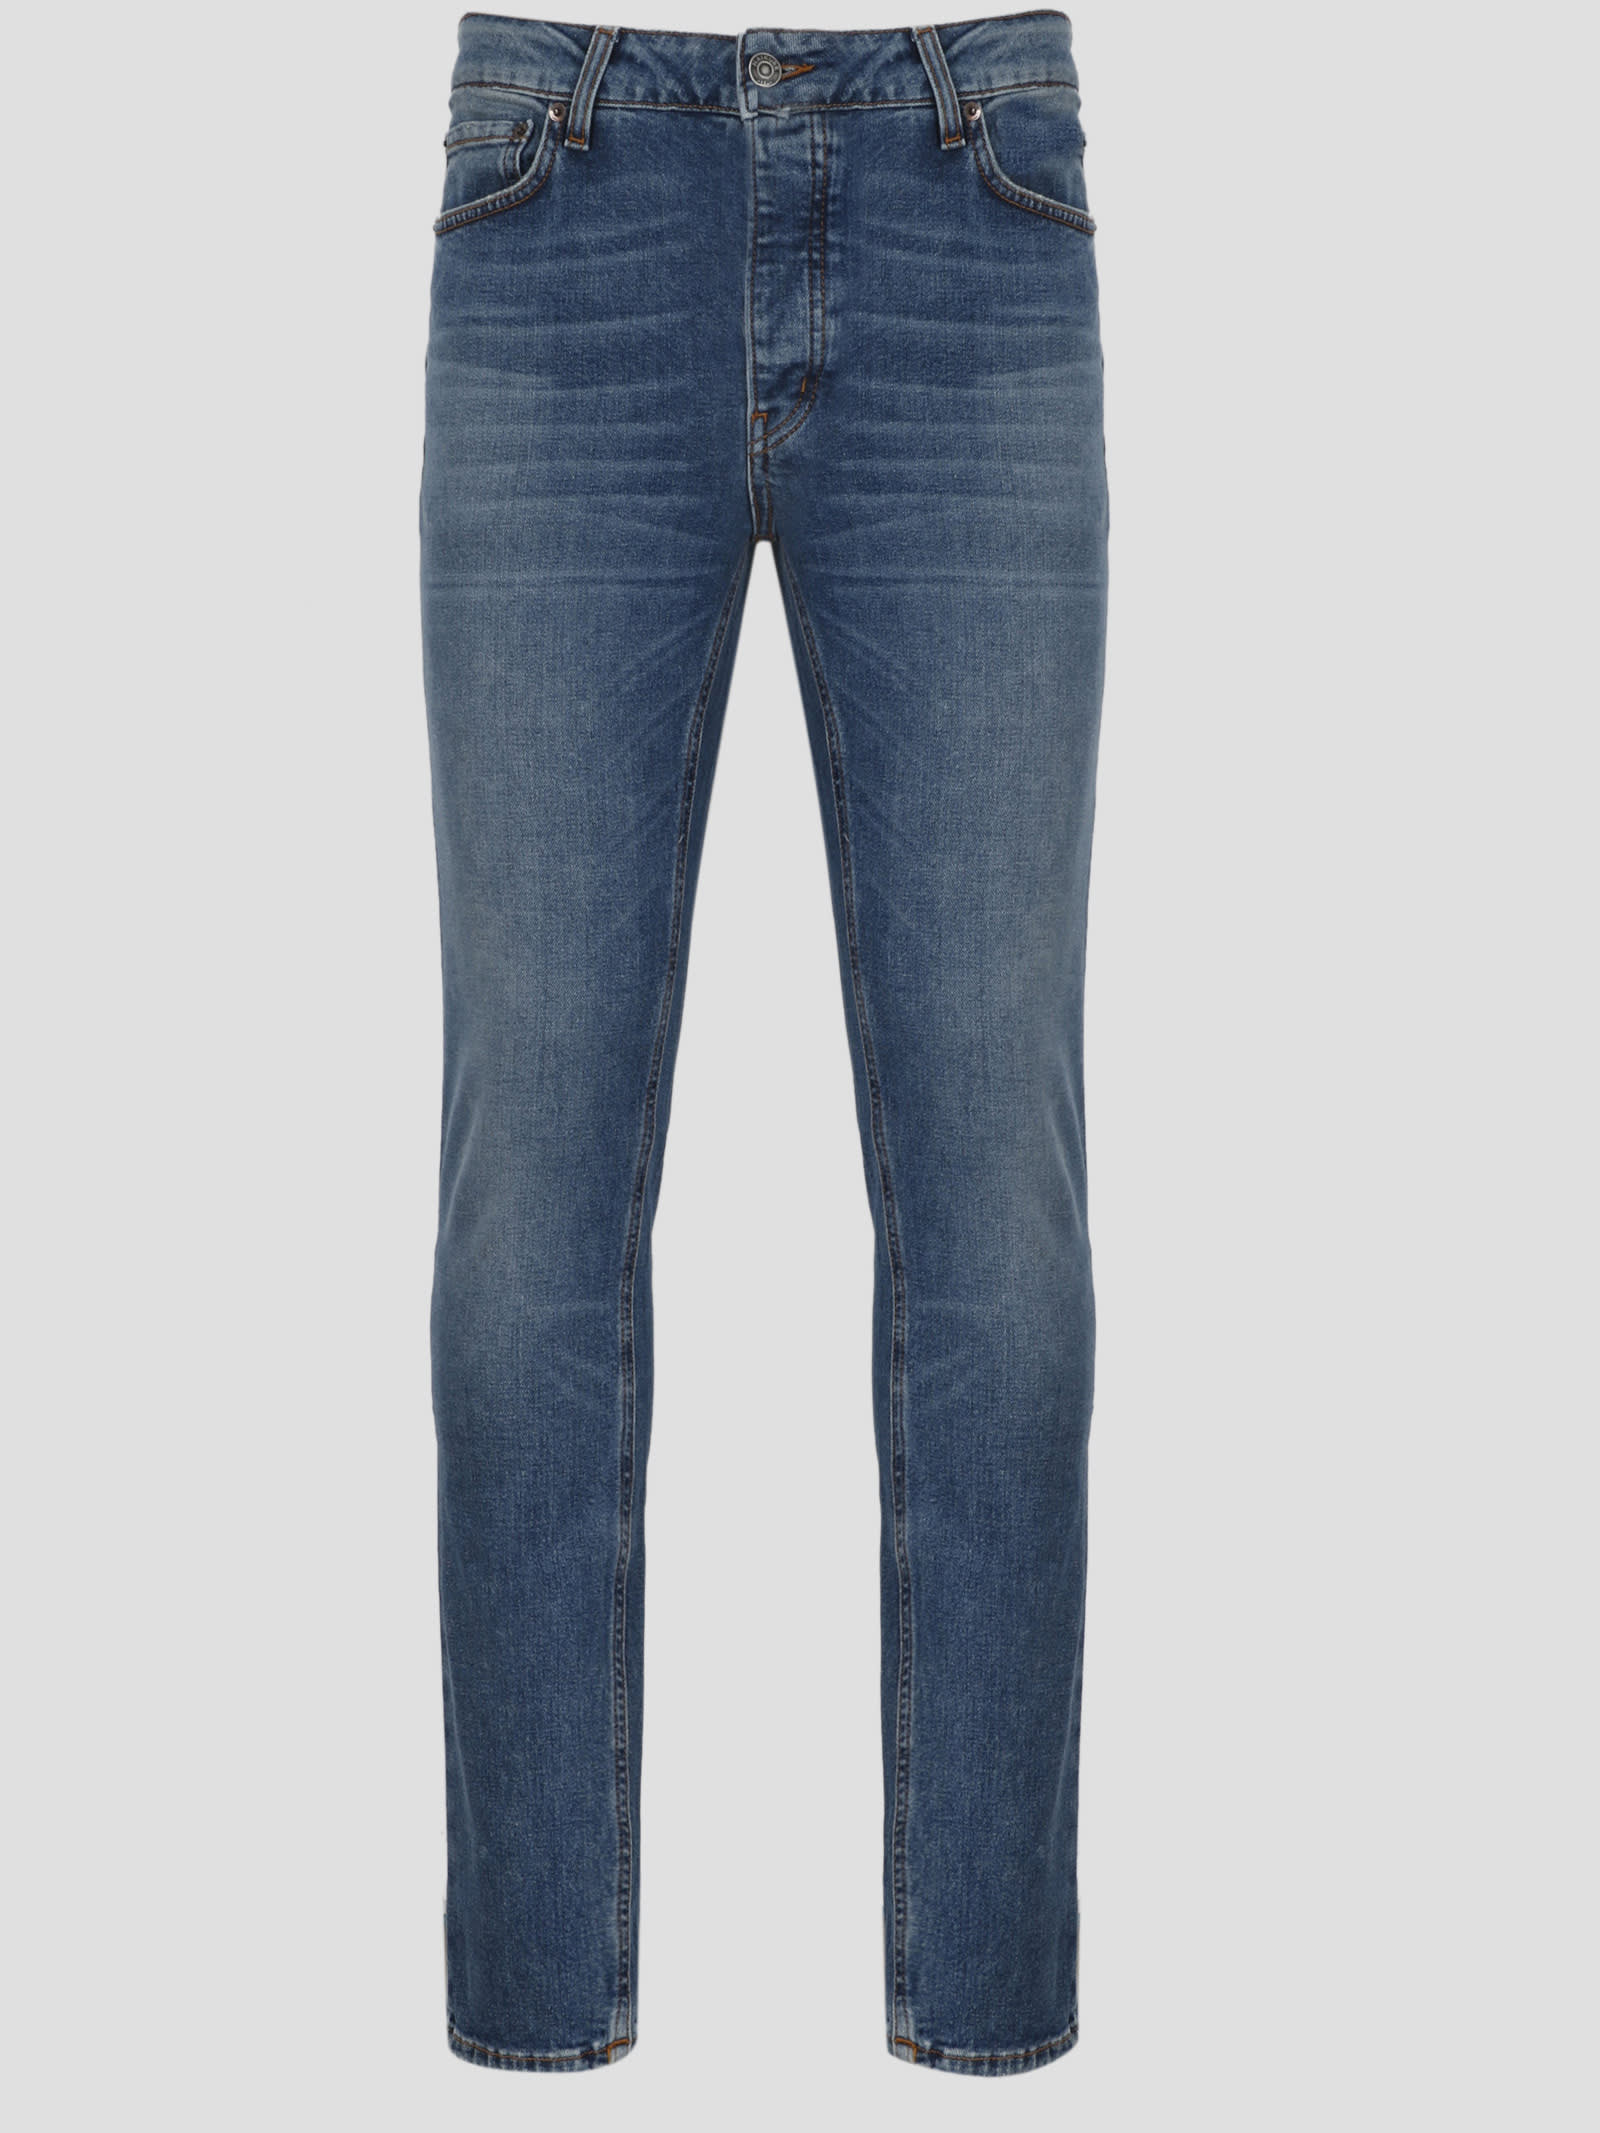 Haikure Cleveland Jeans